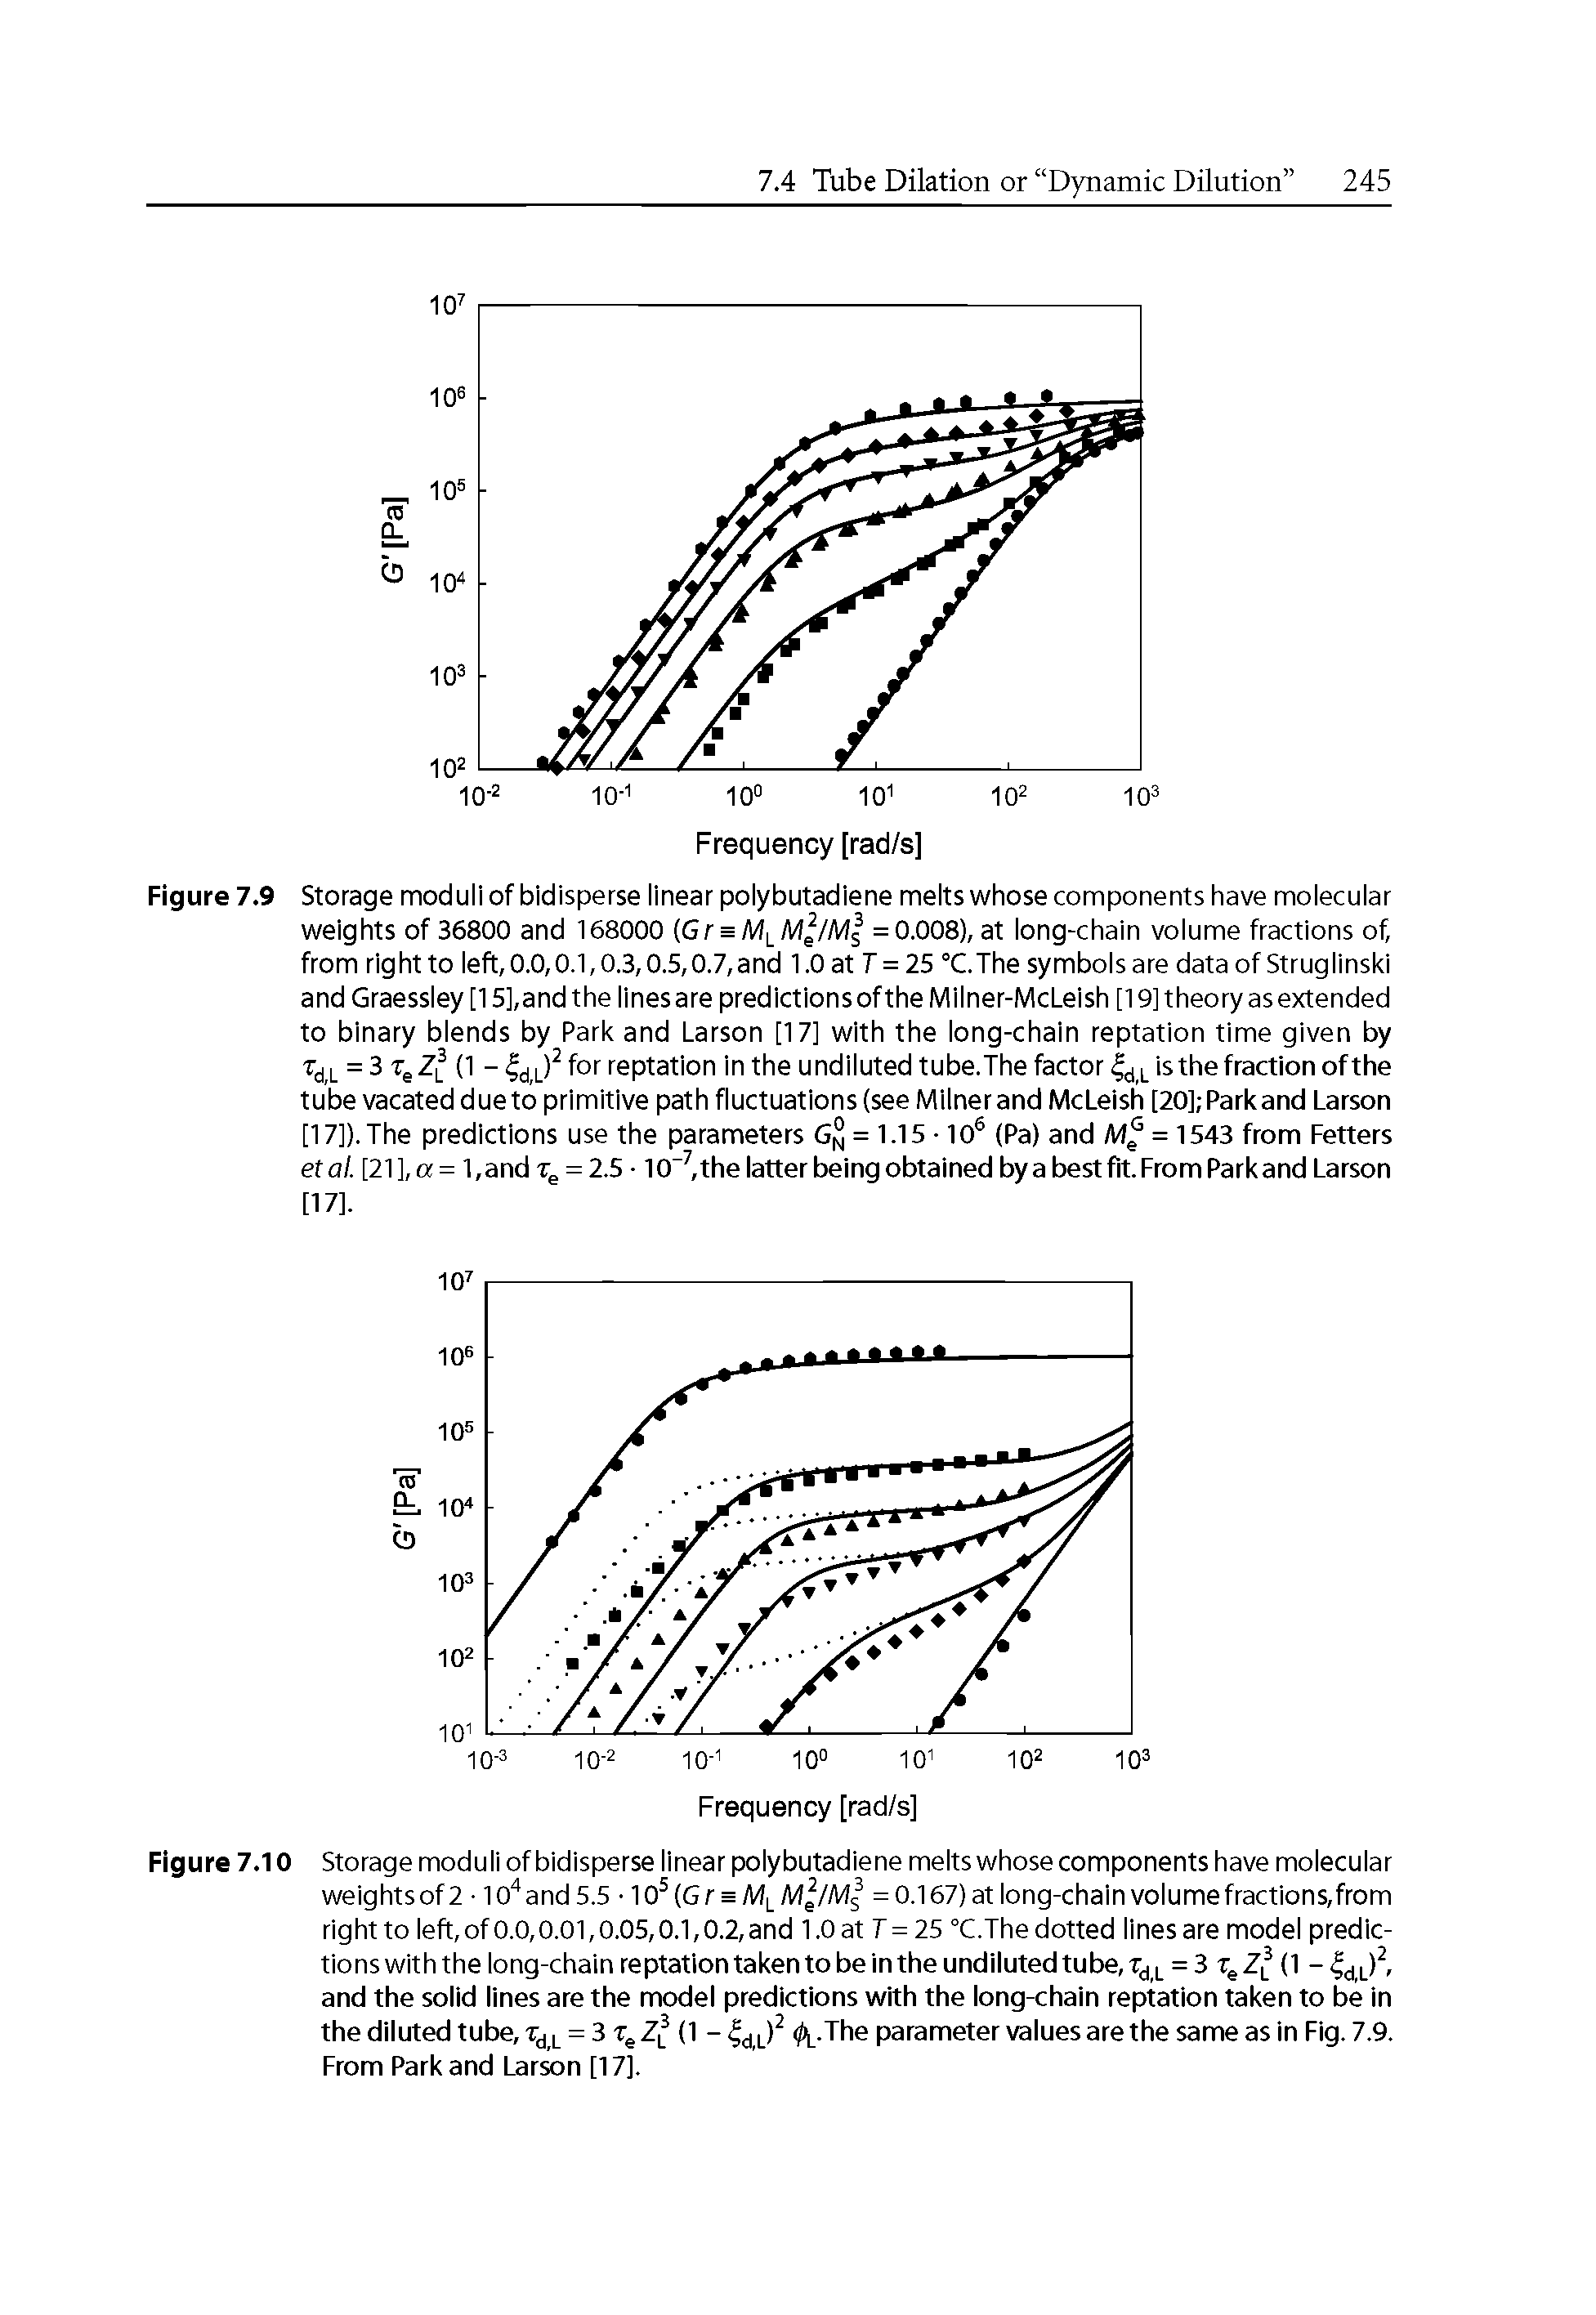 Figure 7.9 Storage moduli of bidisperse linear polybutadiene melts whose components have molecular weights of 36800 and 168000 (Gr = MiMg/M =0.008), at long-chain volume fractions of, from right to left, 0.0,0.1,0.3,0.5,0.7,and 1.0 at 7 = 25 °C.The symbols are data of Struglinski and Graessley [15],andthe linesare predictions of the Milner-McLeish [19] theory as extended to binary blends by Park and Larson [17] with the long-chain reptation time given by td,L = 3 r zl (1 - for reptation in the undiluted tube.The factor 4i,L tbe fraction of the...